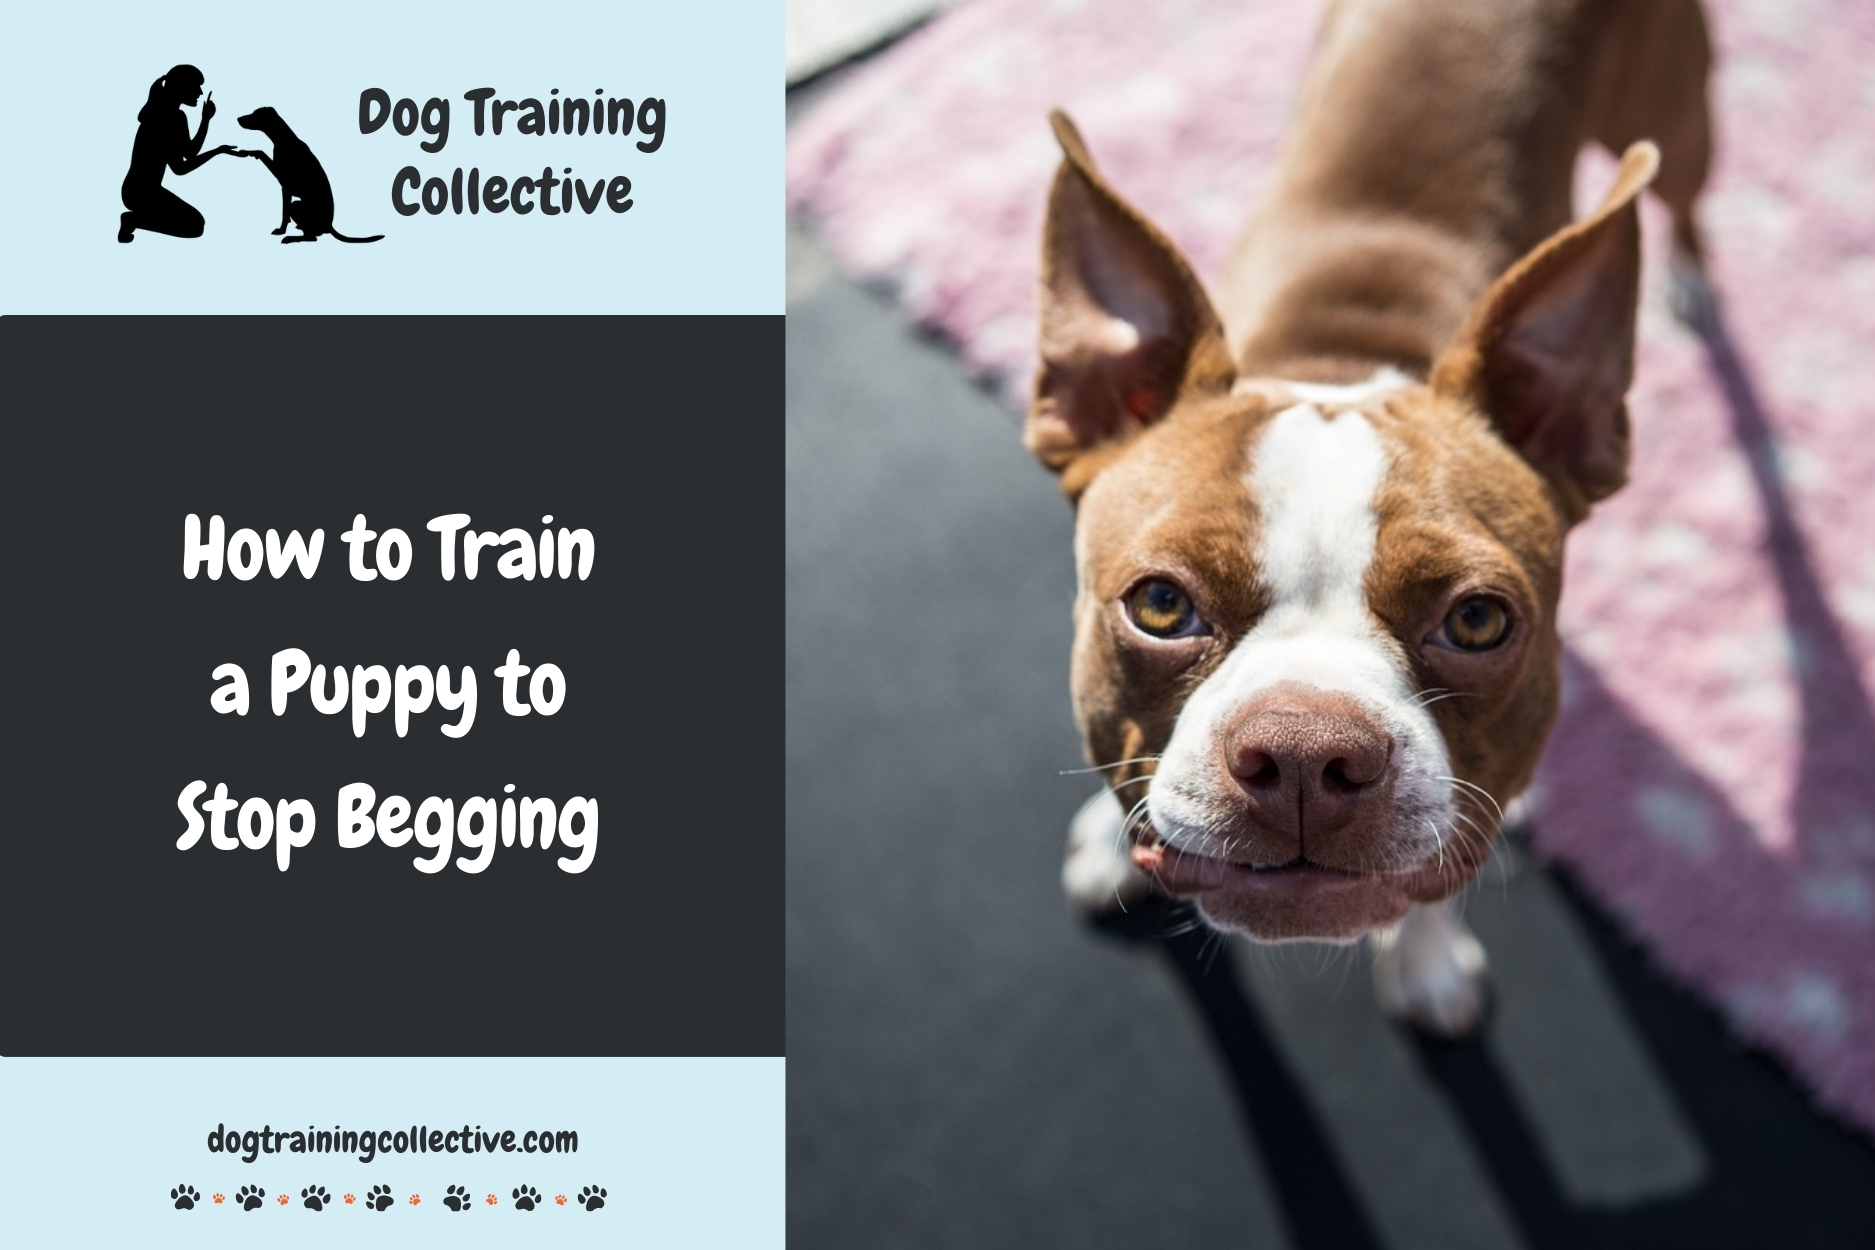 How to Train a Puppy to Stop Begging